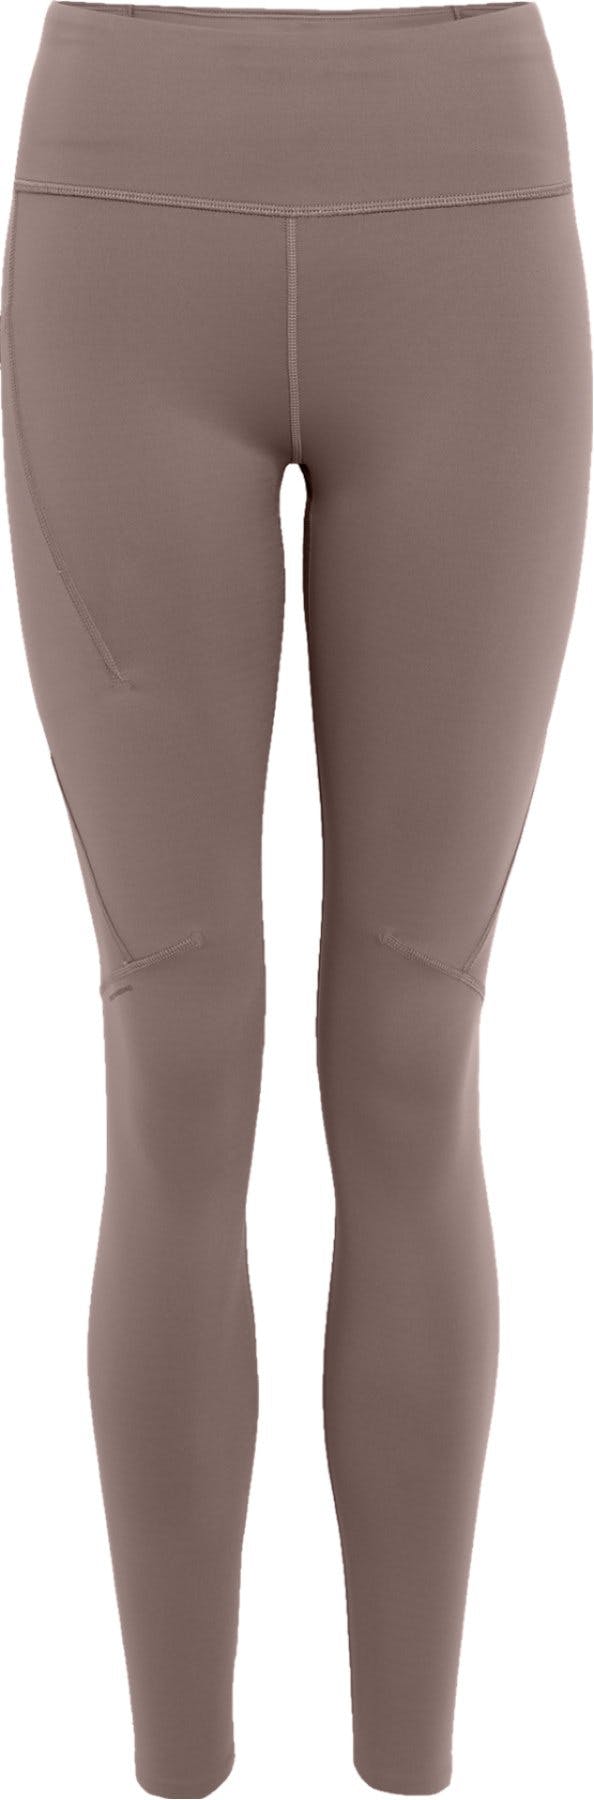 Product image for Performance Tights - Women's